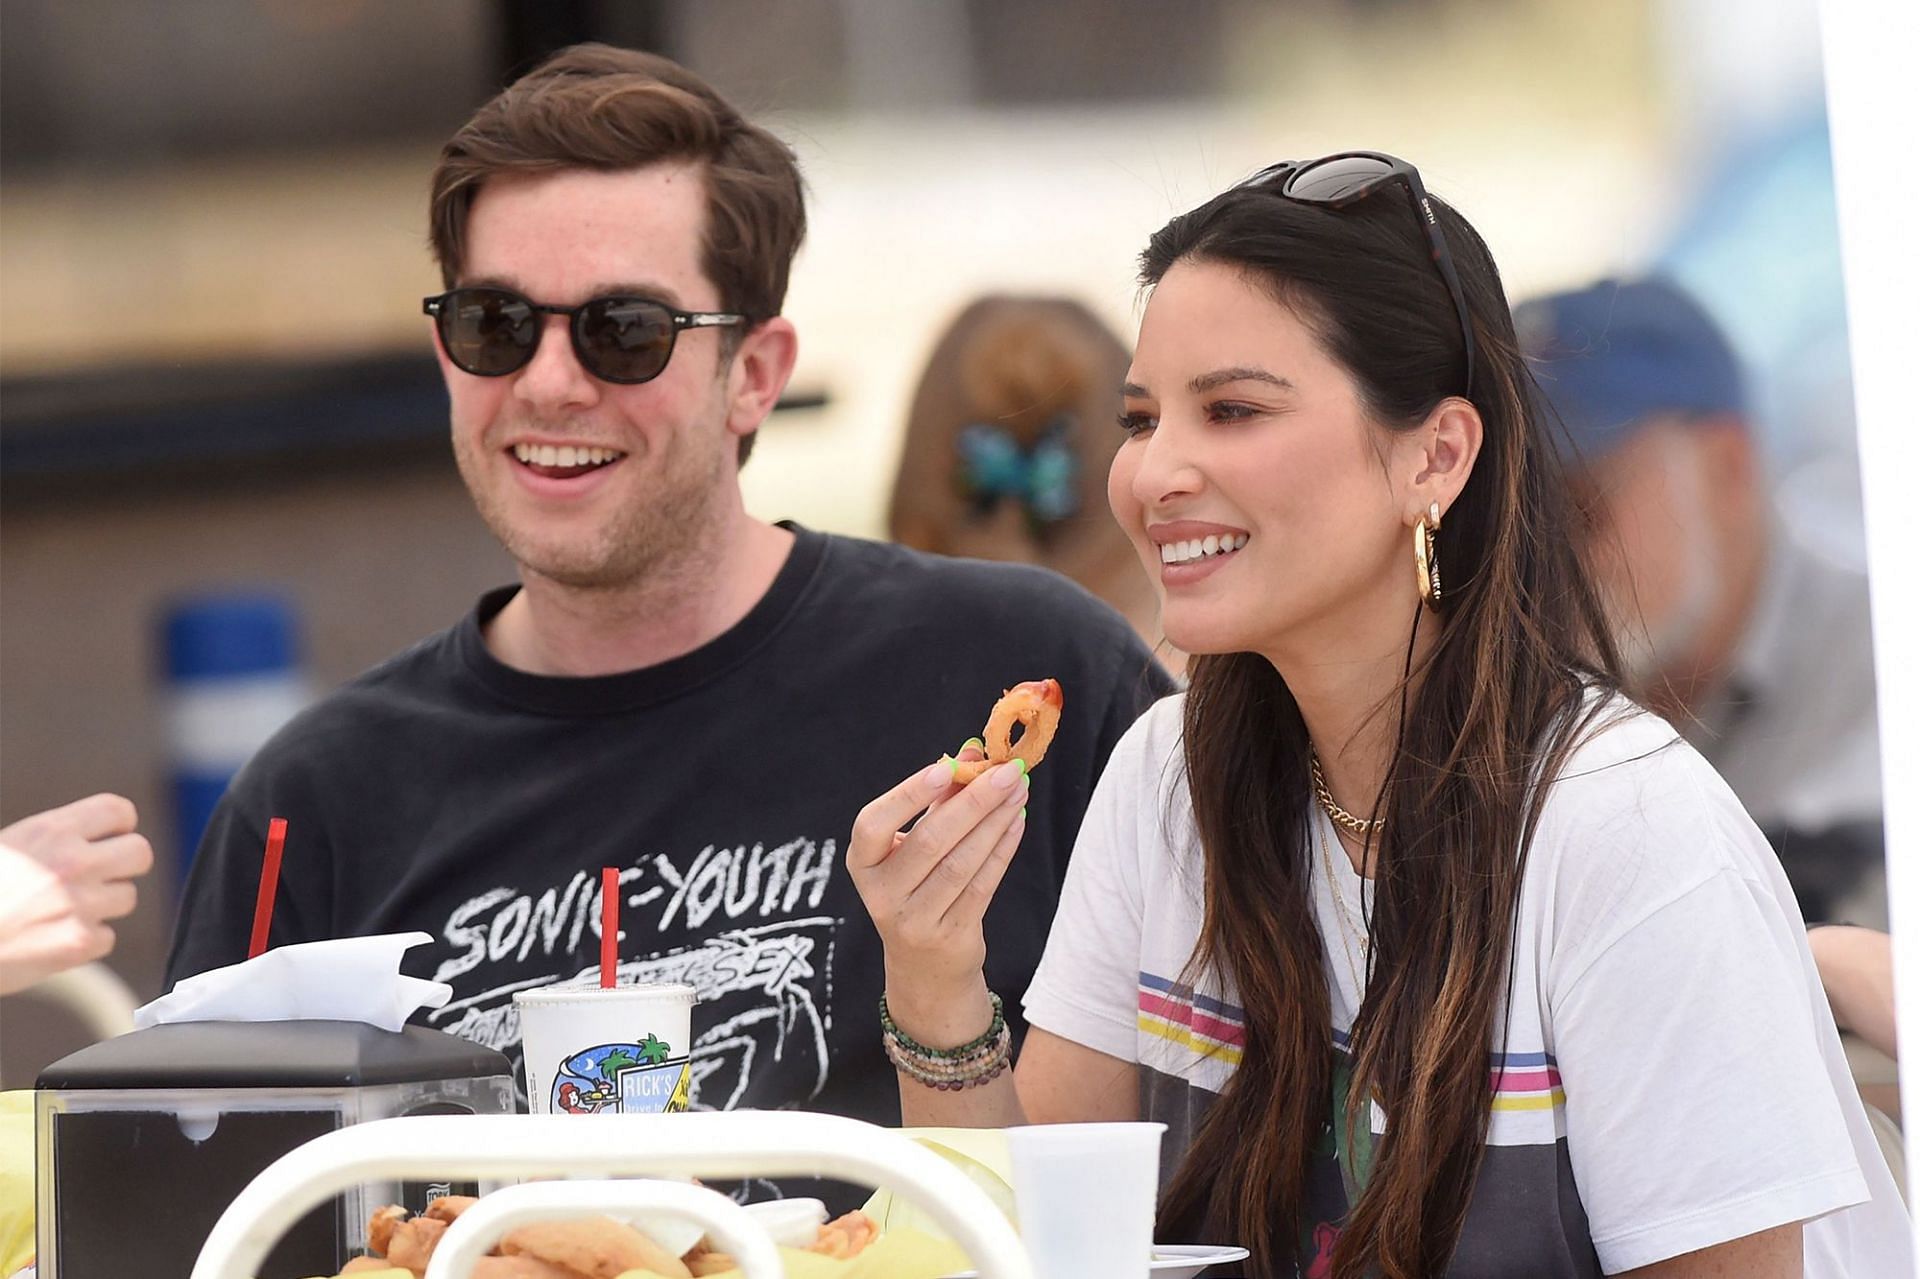 John Mulaney and Olivia Munn are rumored to have broken up (Image via Shutterstock)